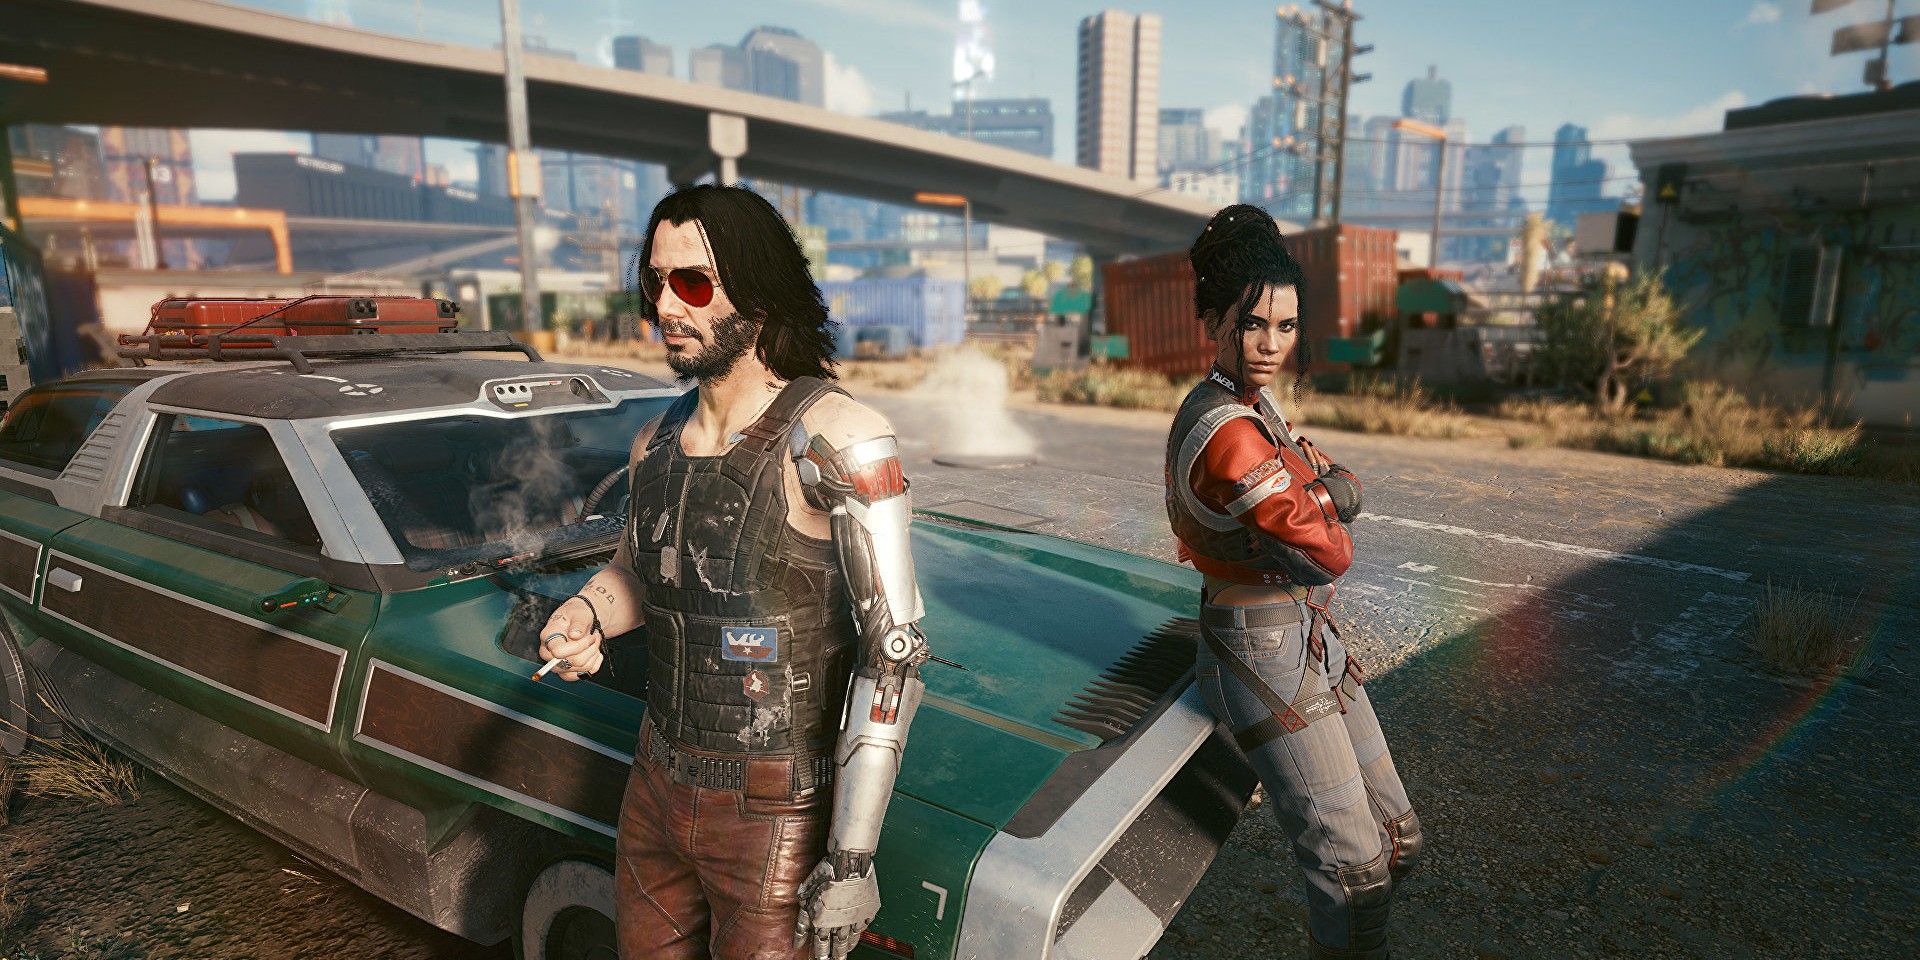 Jonny Silverhand and Panam stand by a car in Cyberpunk 2077